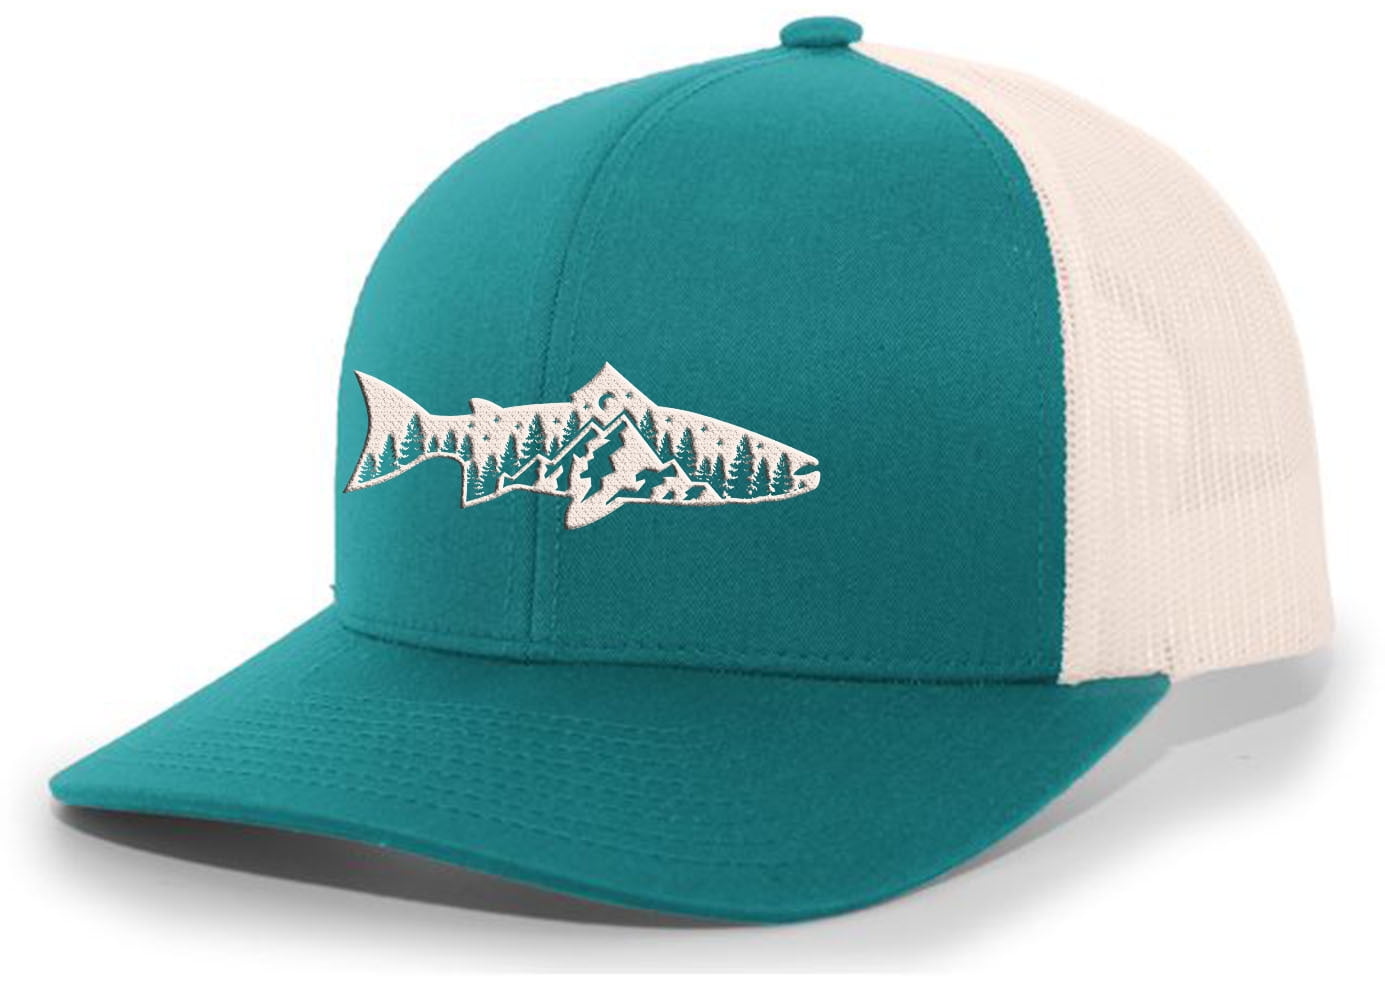 Men's Outdoors Fishing Trout Scenic Forest Woodland Embroidered Mesh Back  Trucker Hat, Teal/Beige 